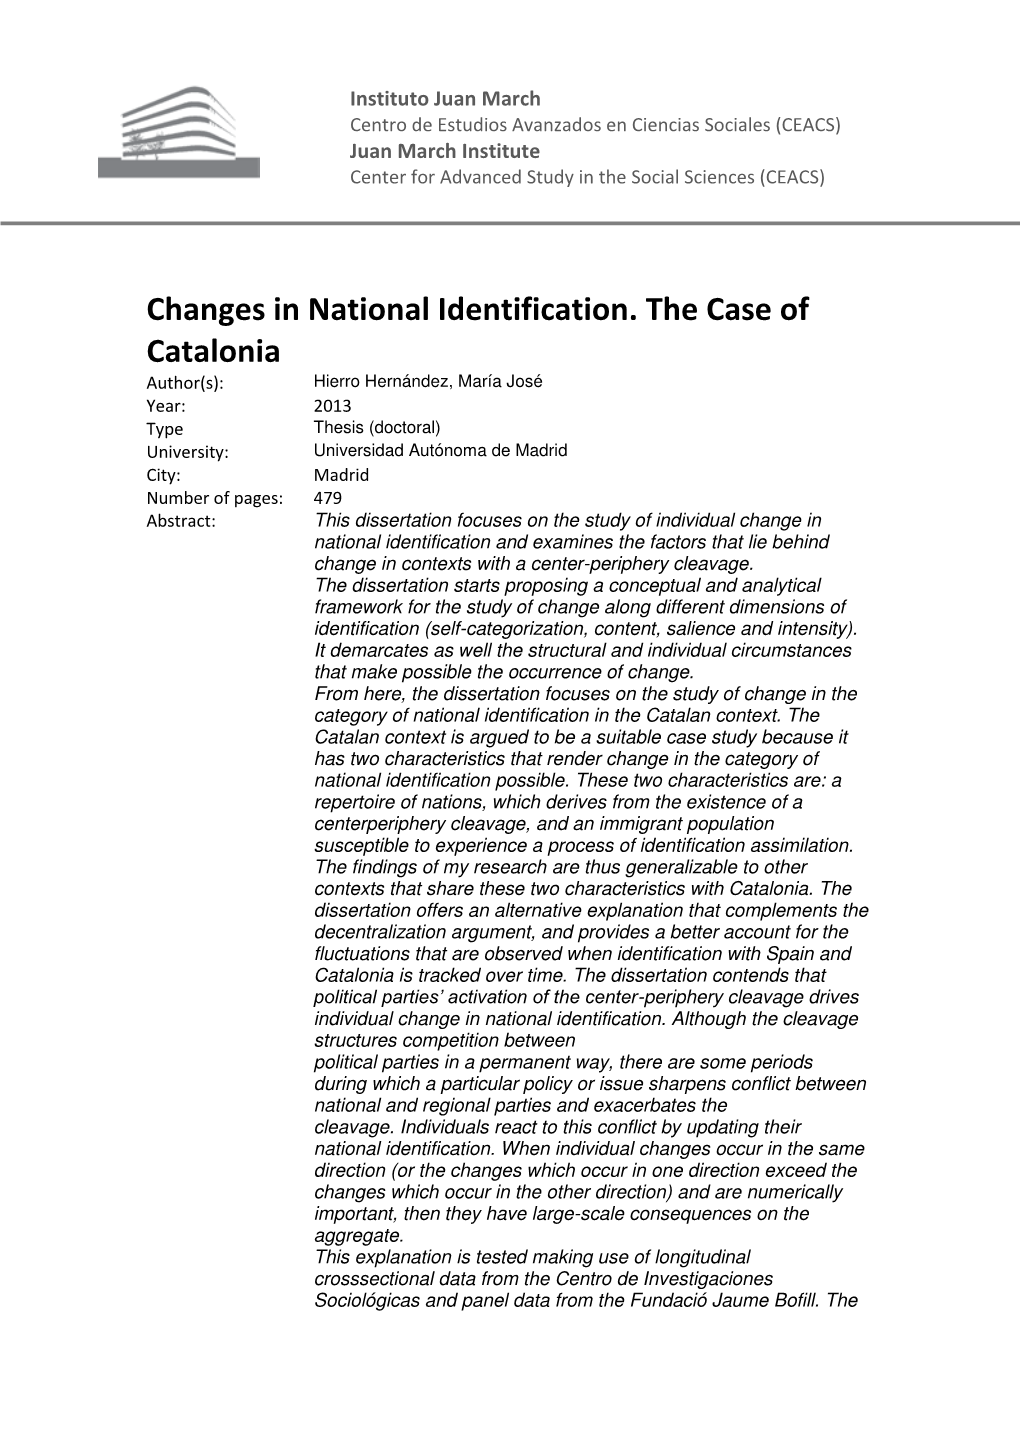 Changes in National Identification. the Case of Catalonia